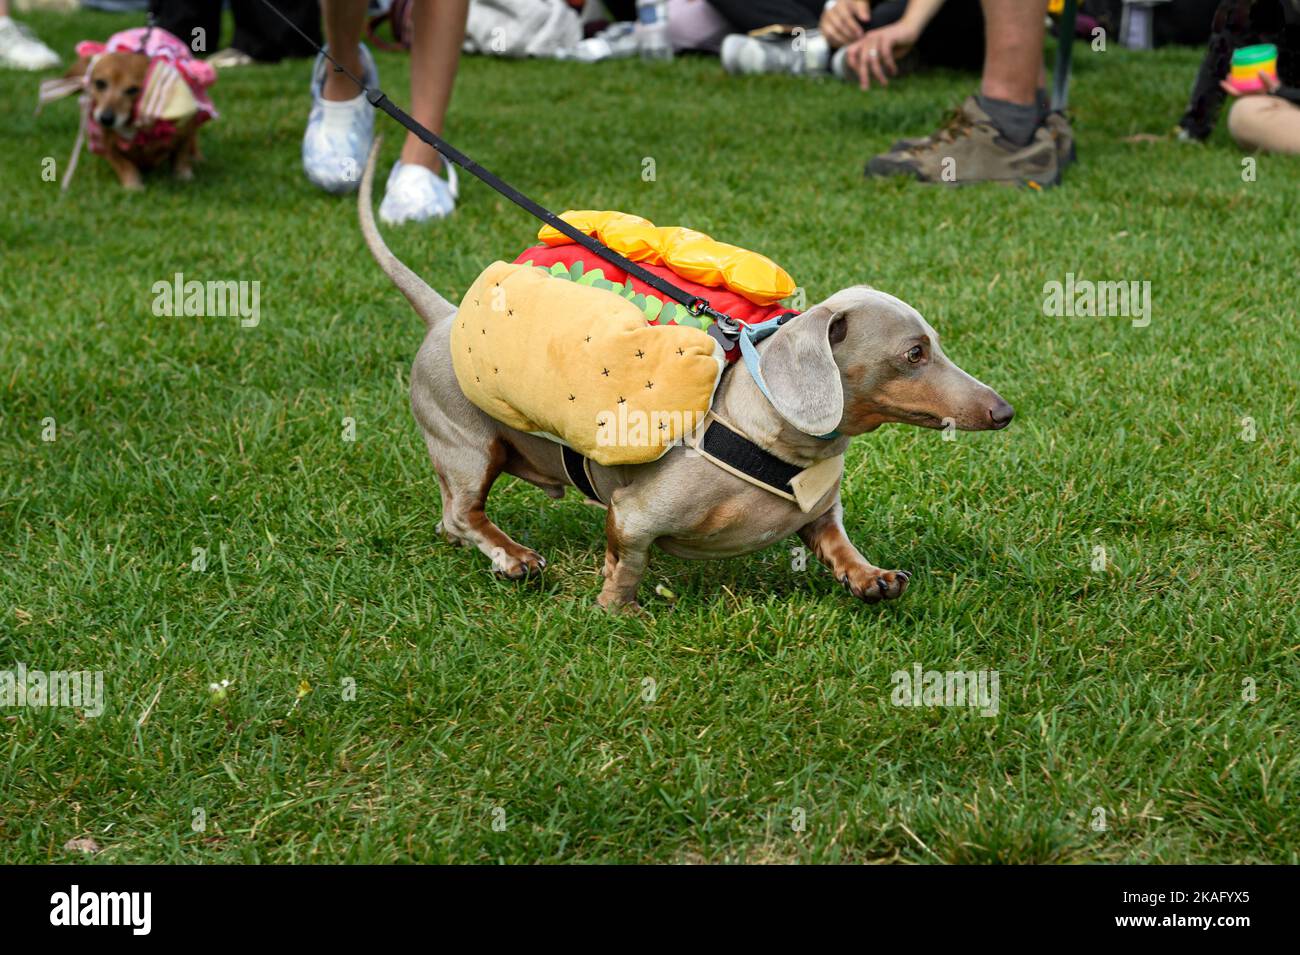 Dachshund Trots By in Hot Dog Costume Spectators Behind  - Dachshund Races Stock Photo